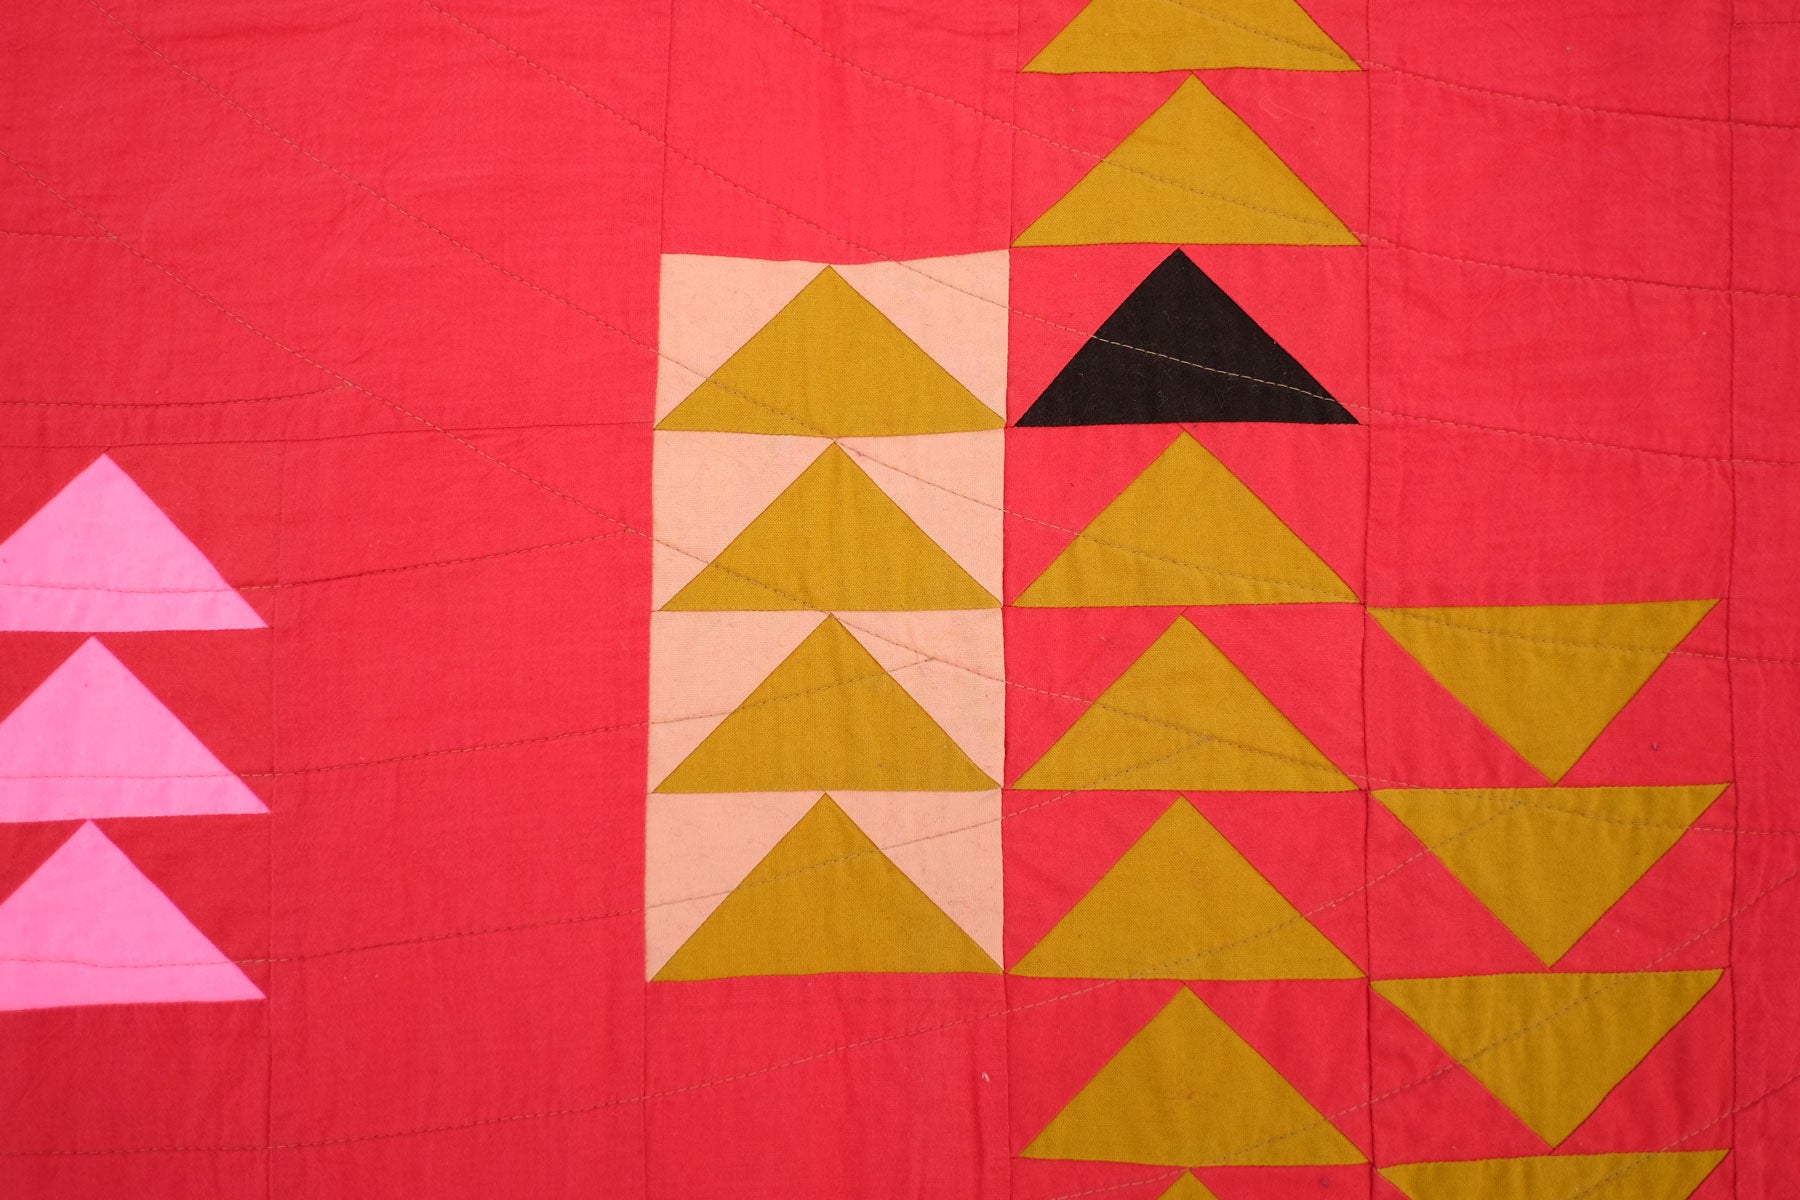 Detail of Shawna Doering's Red Hot Quilt